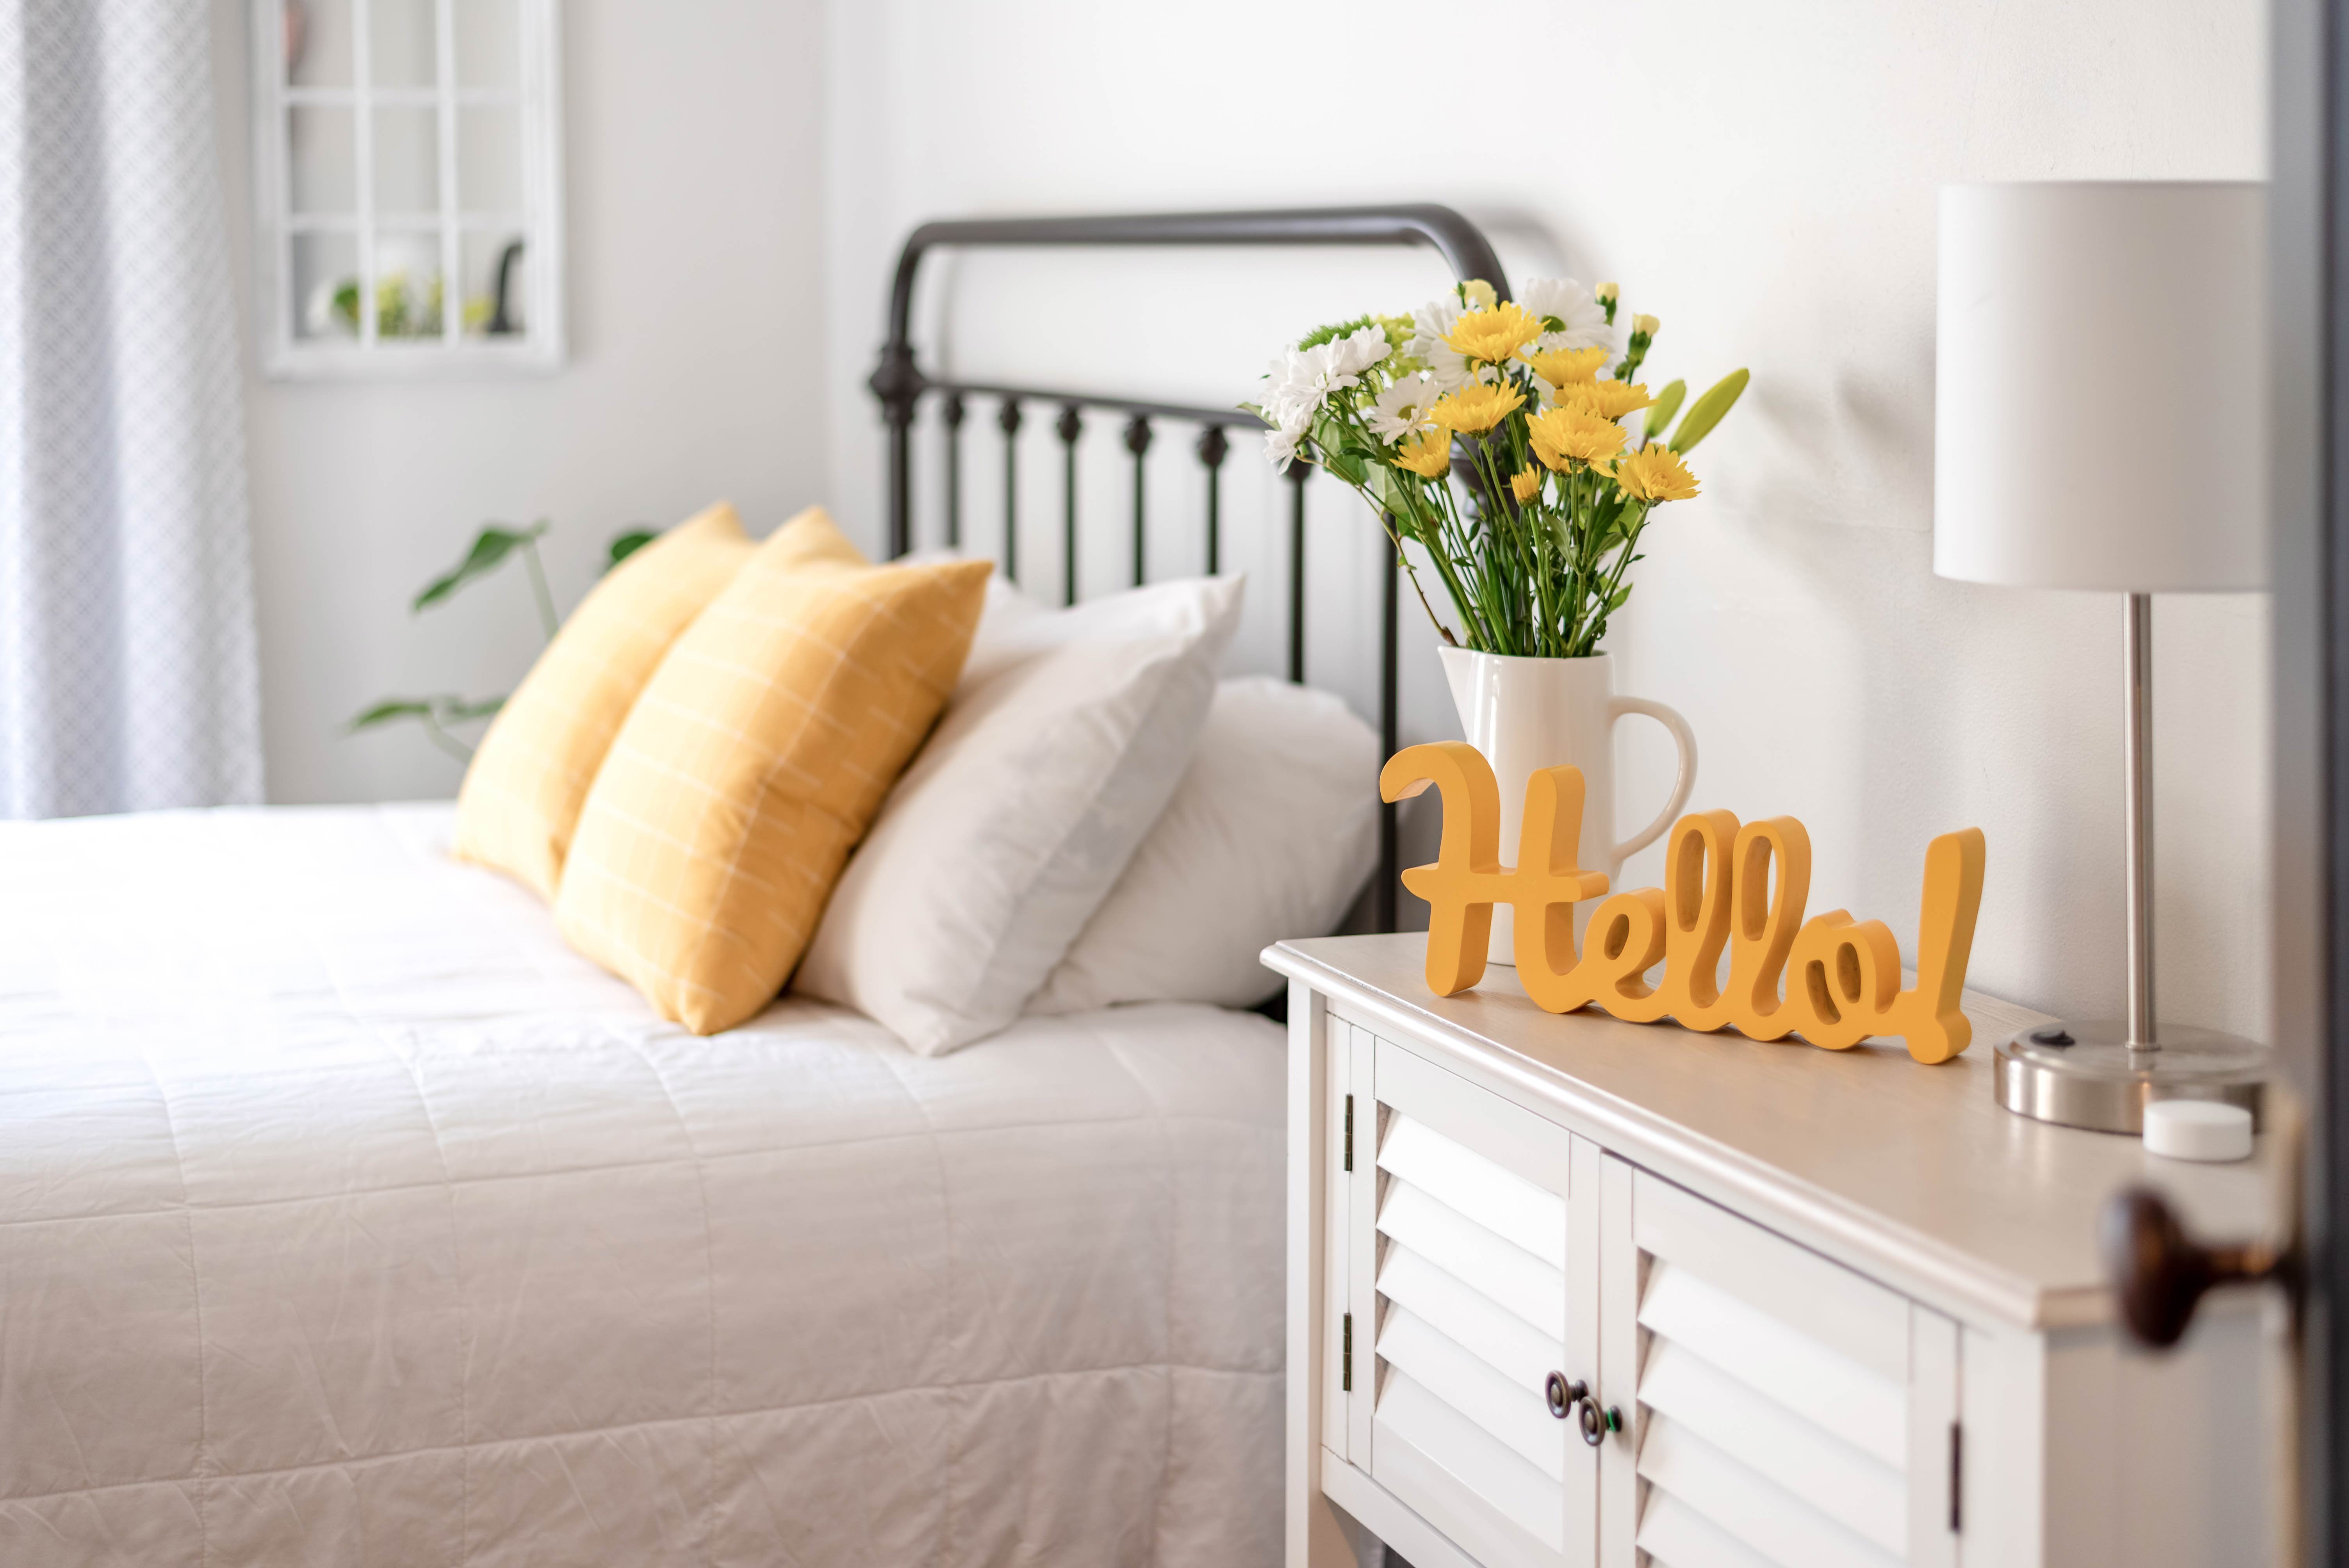 Cheerful-hello-sign-in-clean-and-bright-bedroom-with-yellow-accents